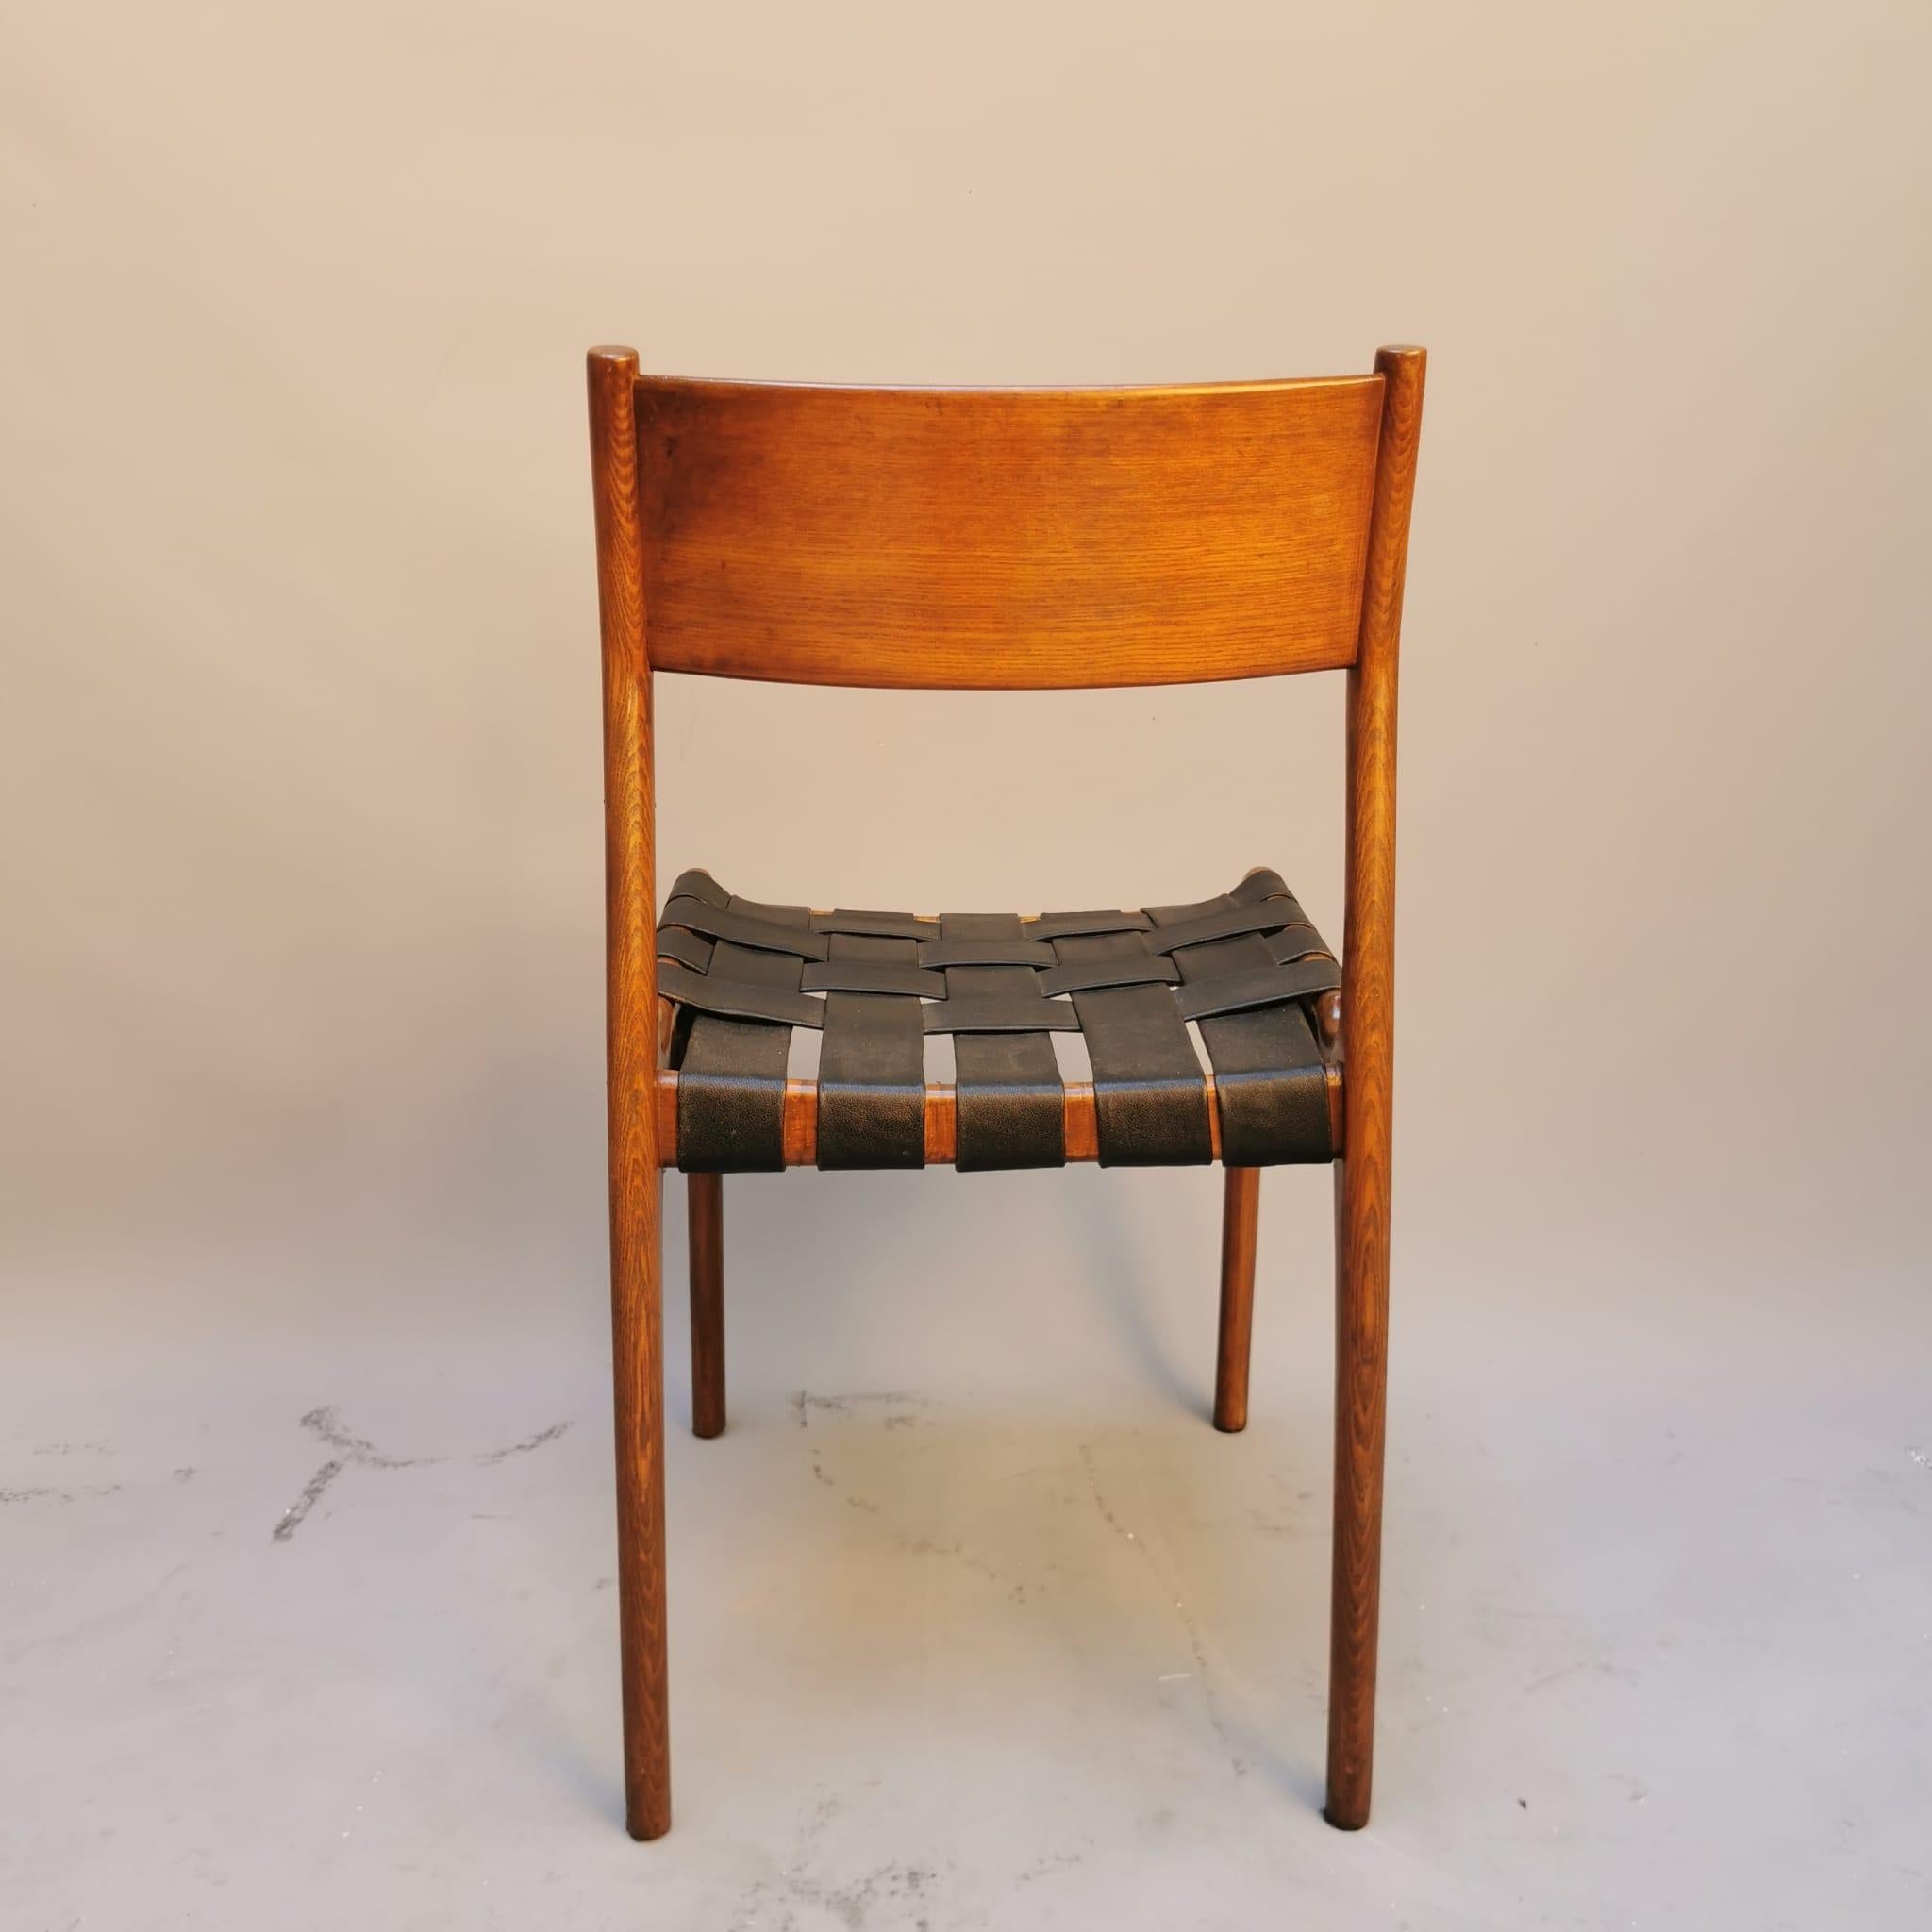 Set of 8 chairs in blonde wood and woven skaï seat. Model filed by the publisher Gessef - Consorzio sedie Friuli (the chairs bear the label) in the 60s in Italy. Of a rare model, inspired by the Scandinavian design of the 60s, these 4 chairs are in